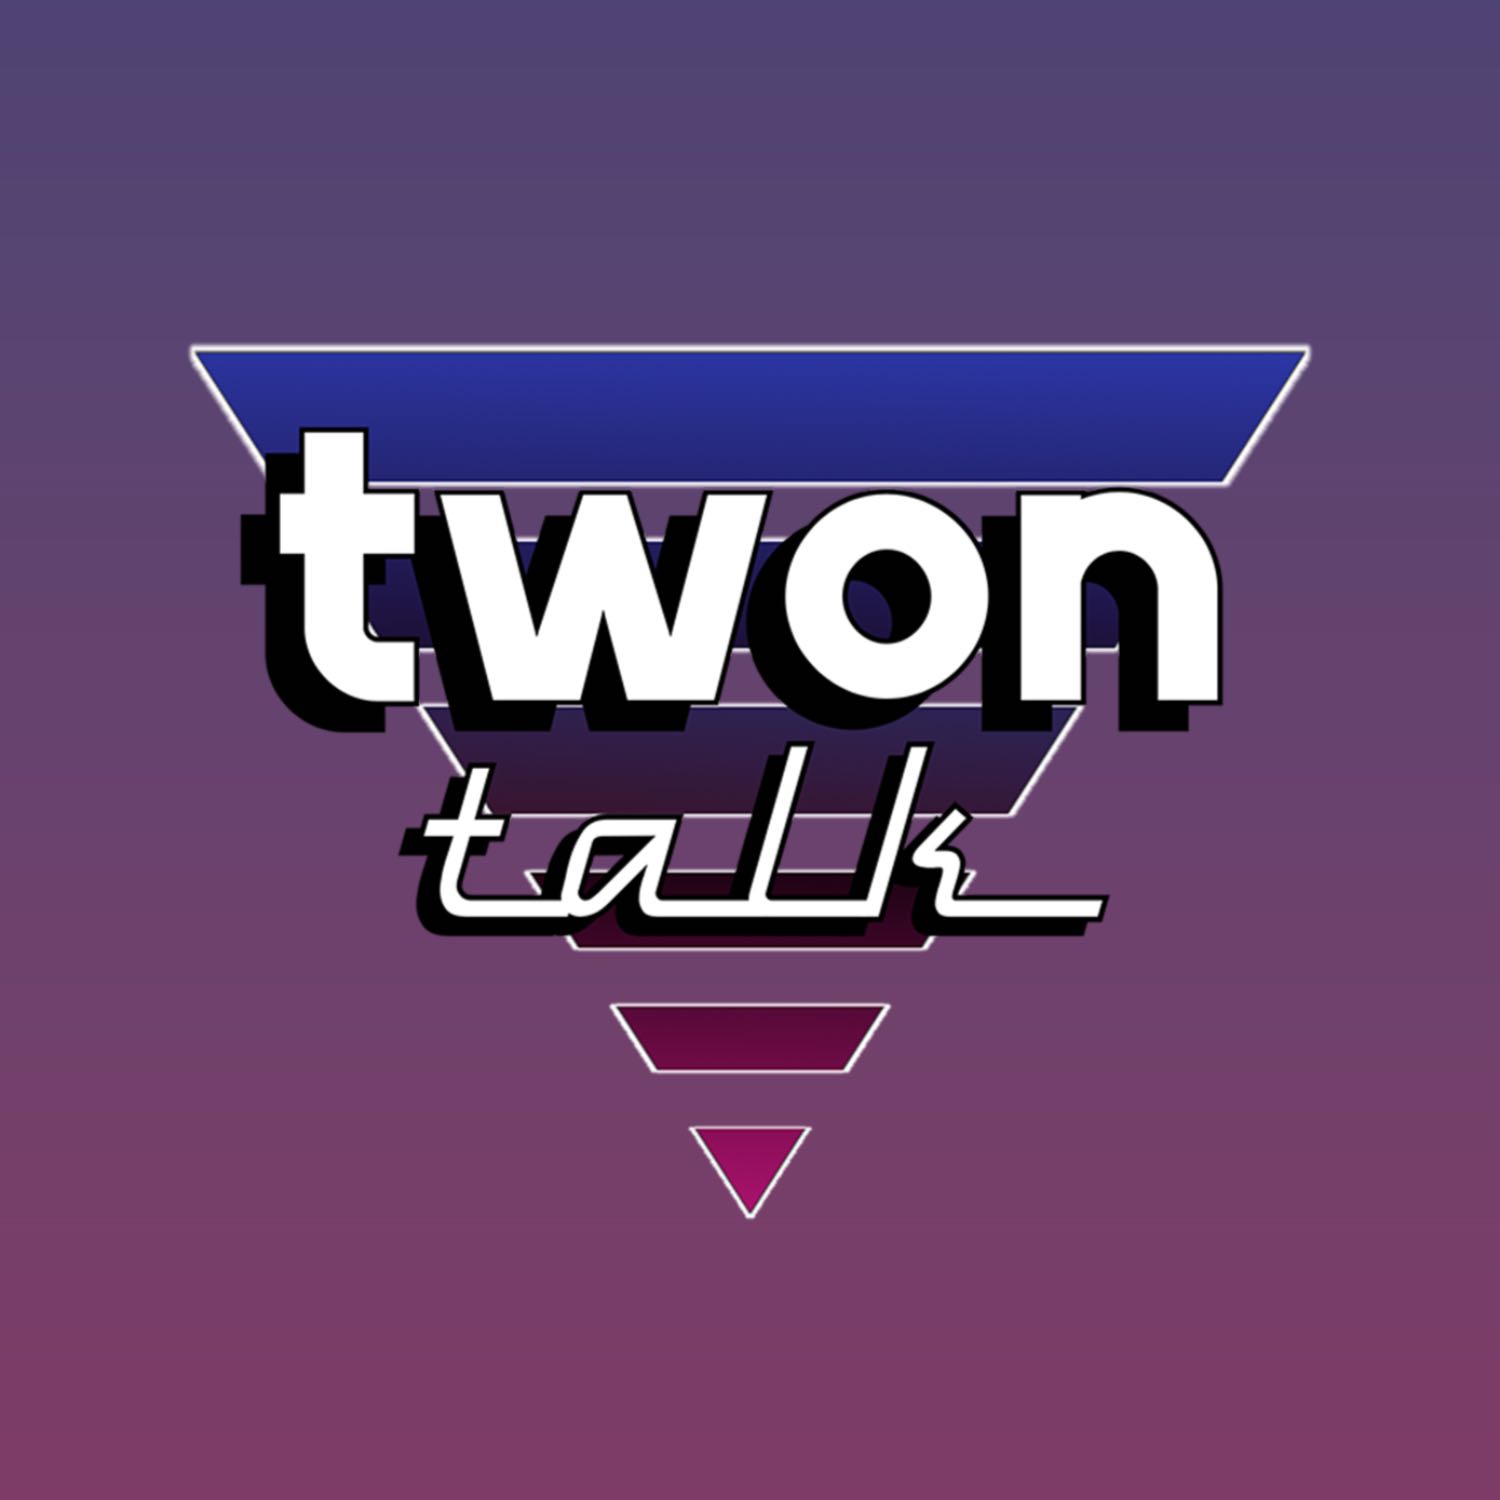 What's Going on with Kanye? – Twon Talk #9